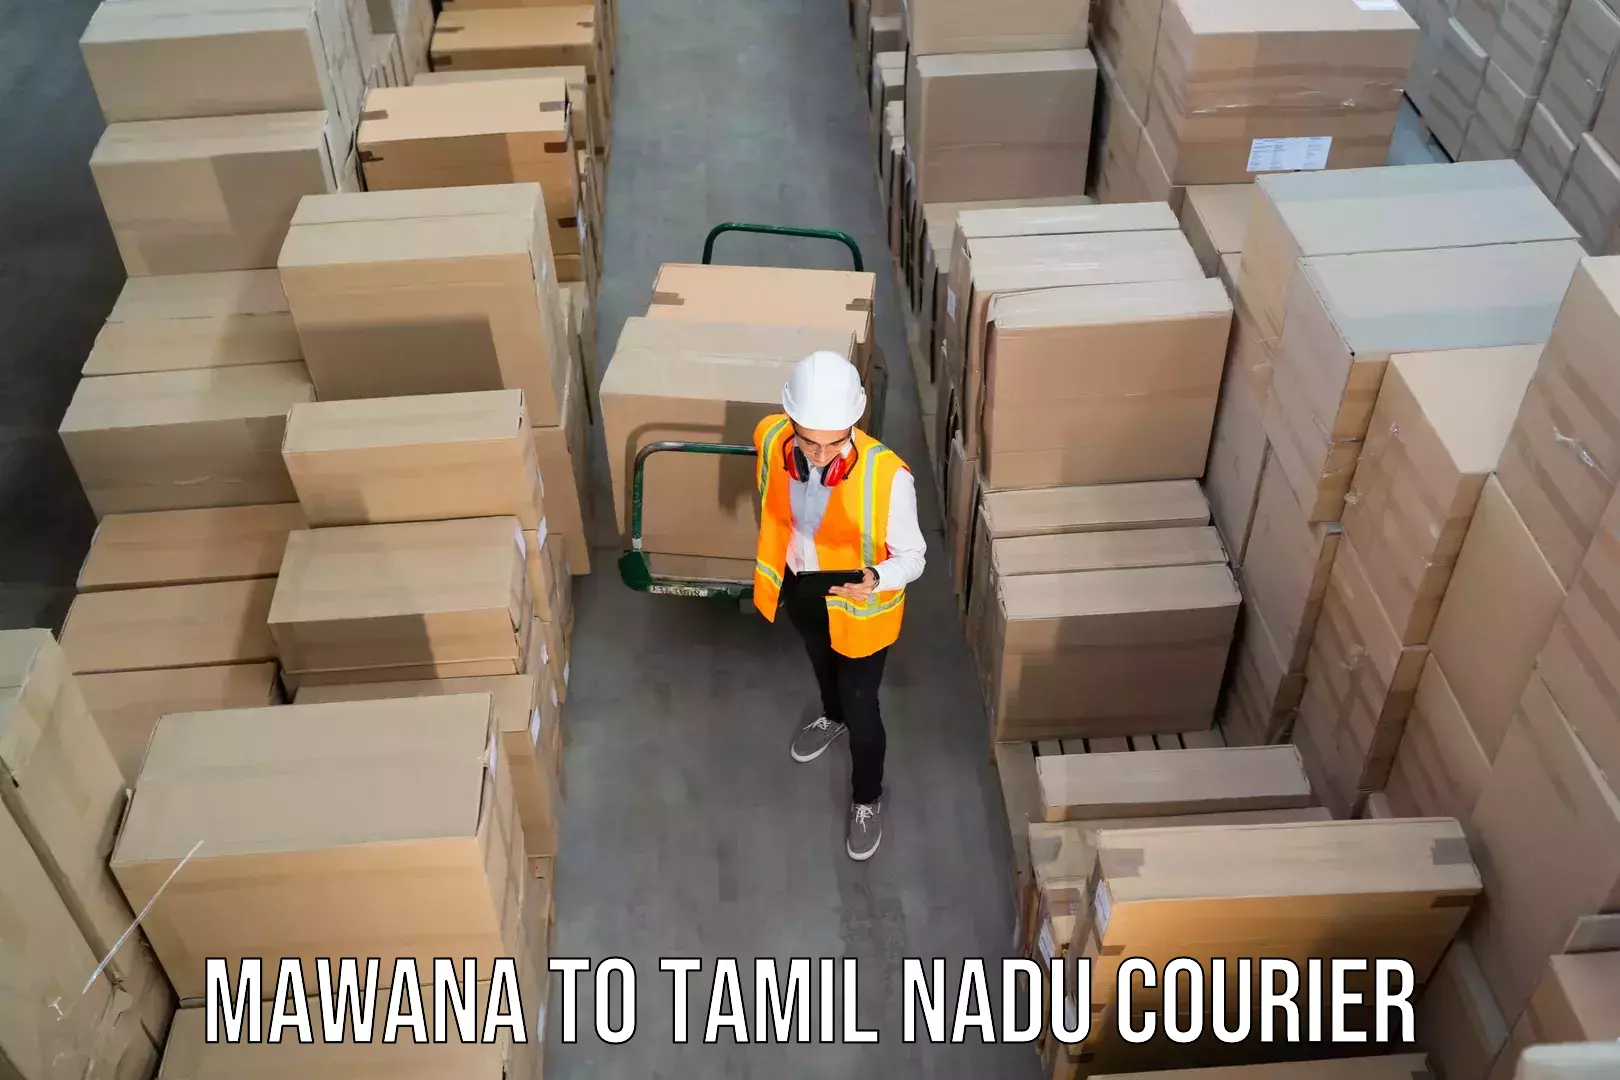 Multi-national courier services Mawana to Padi